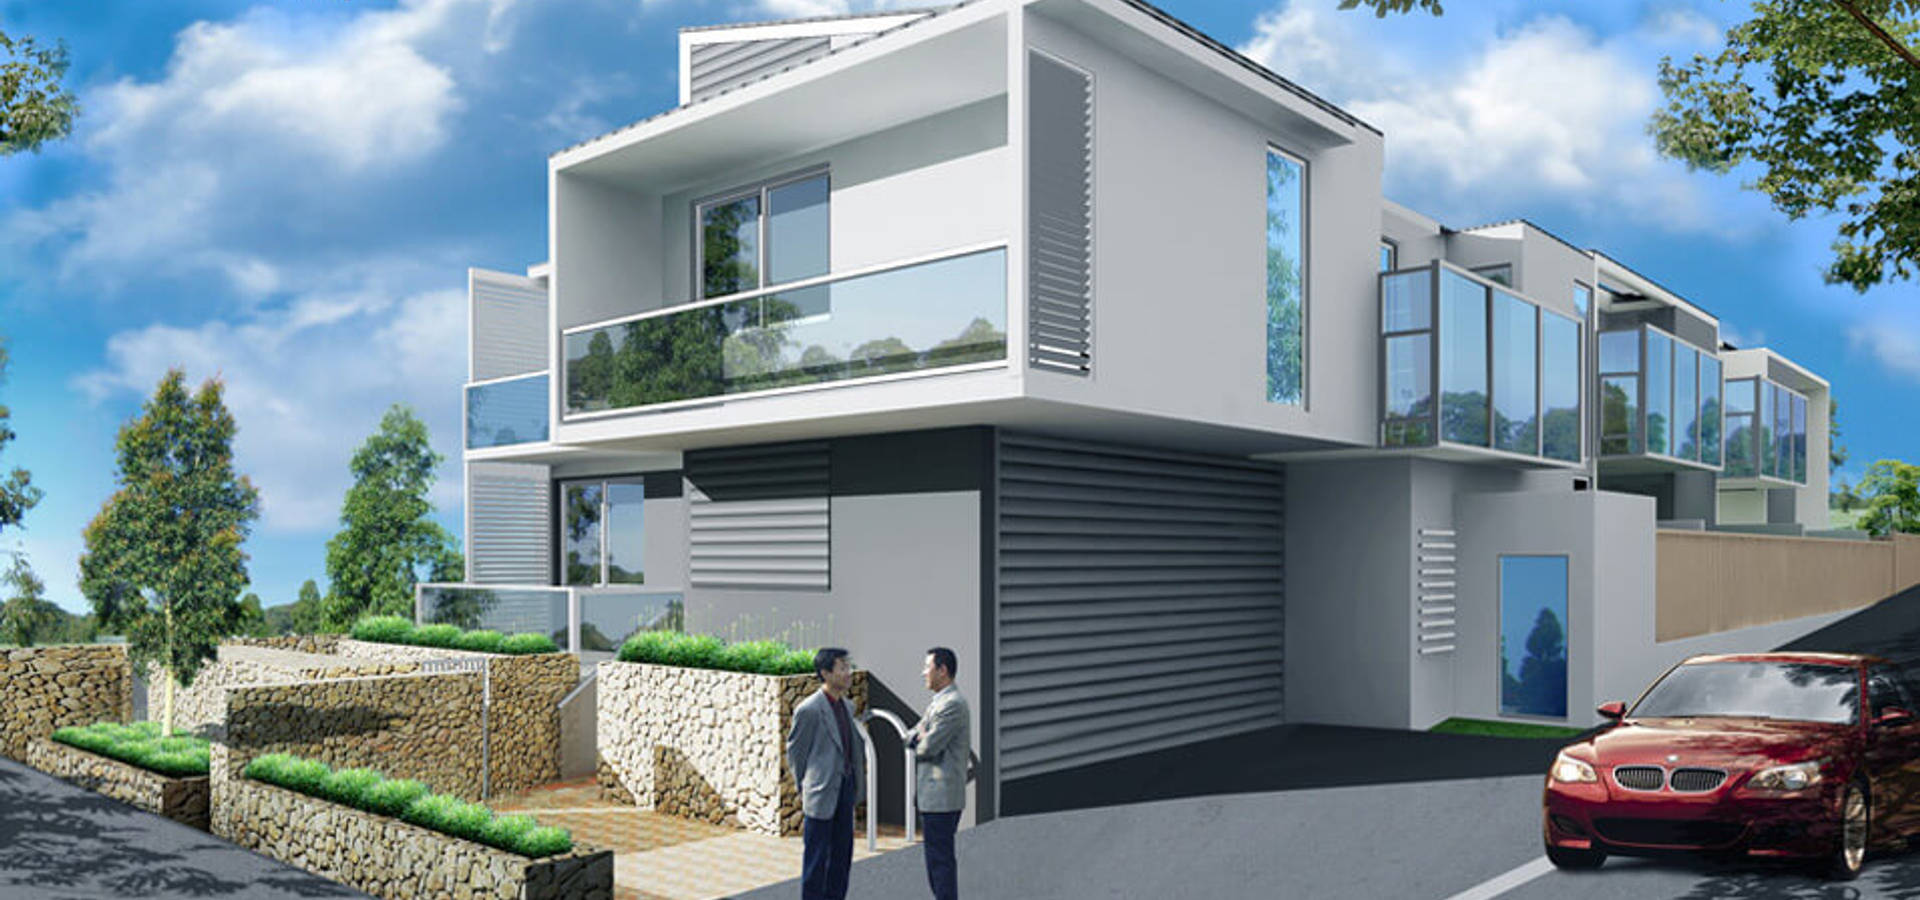 3d architectural rendering companies in india